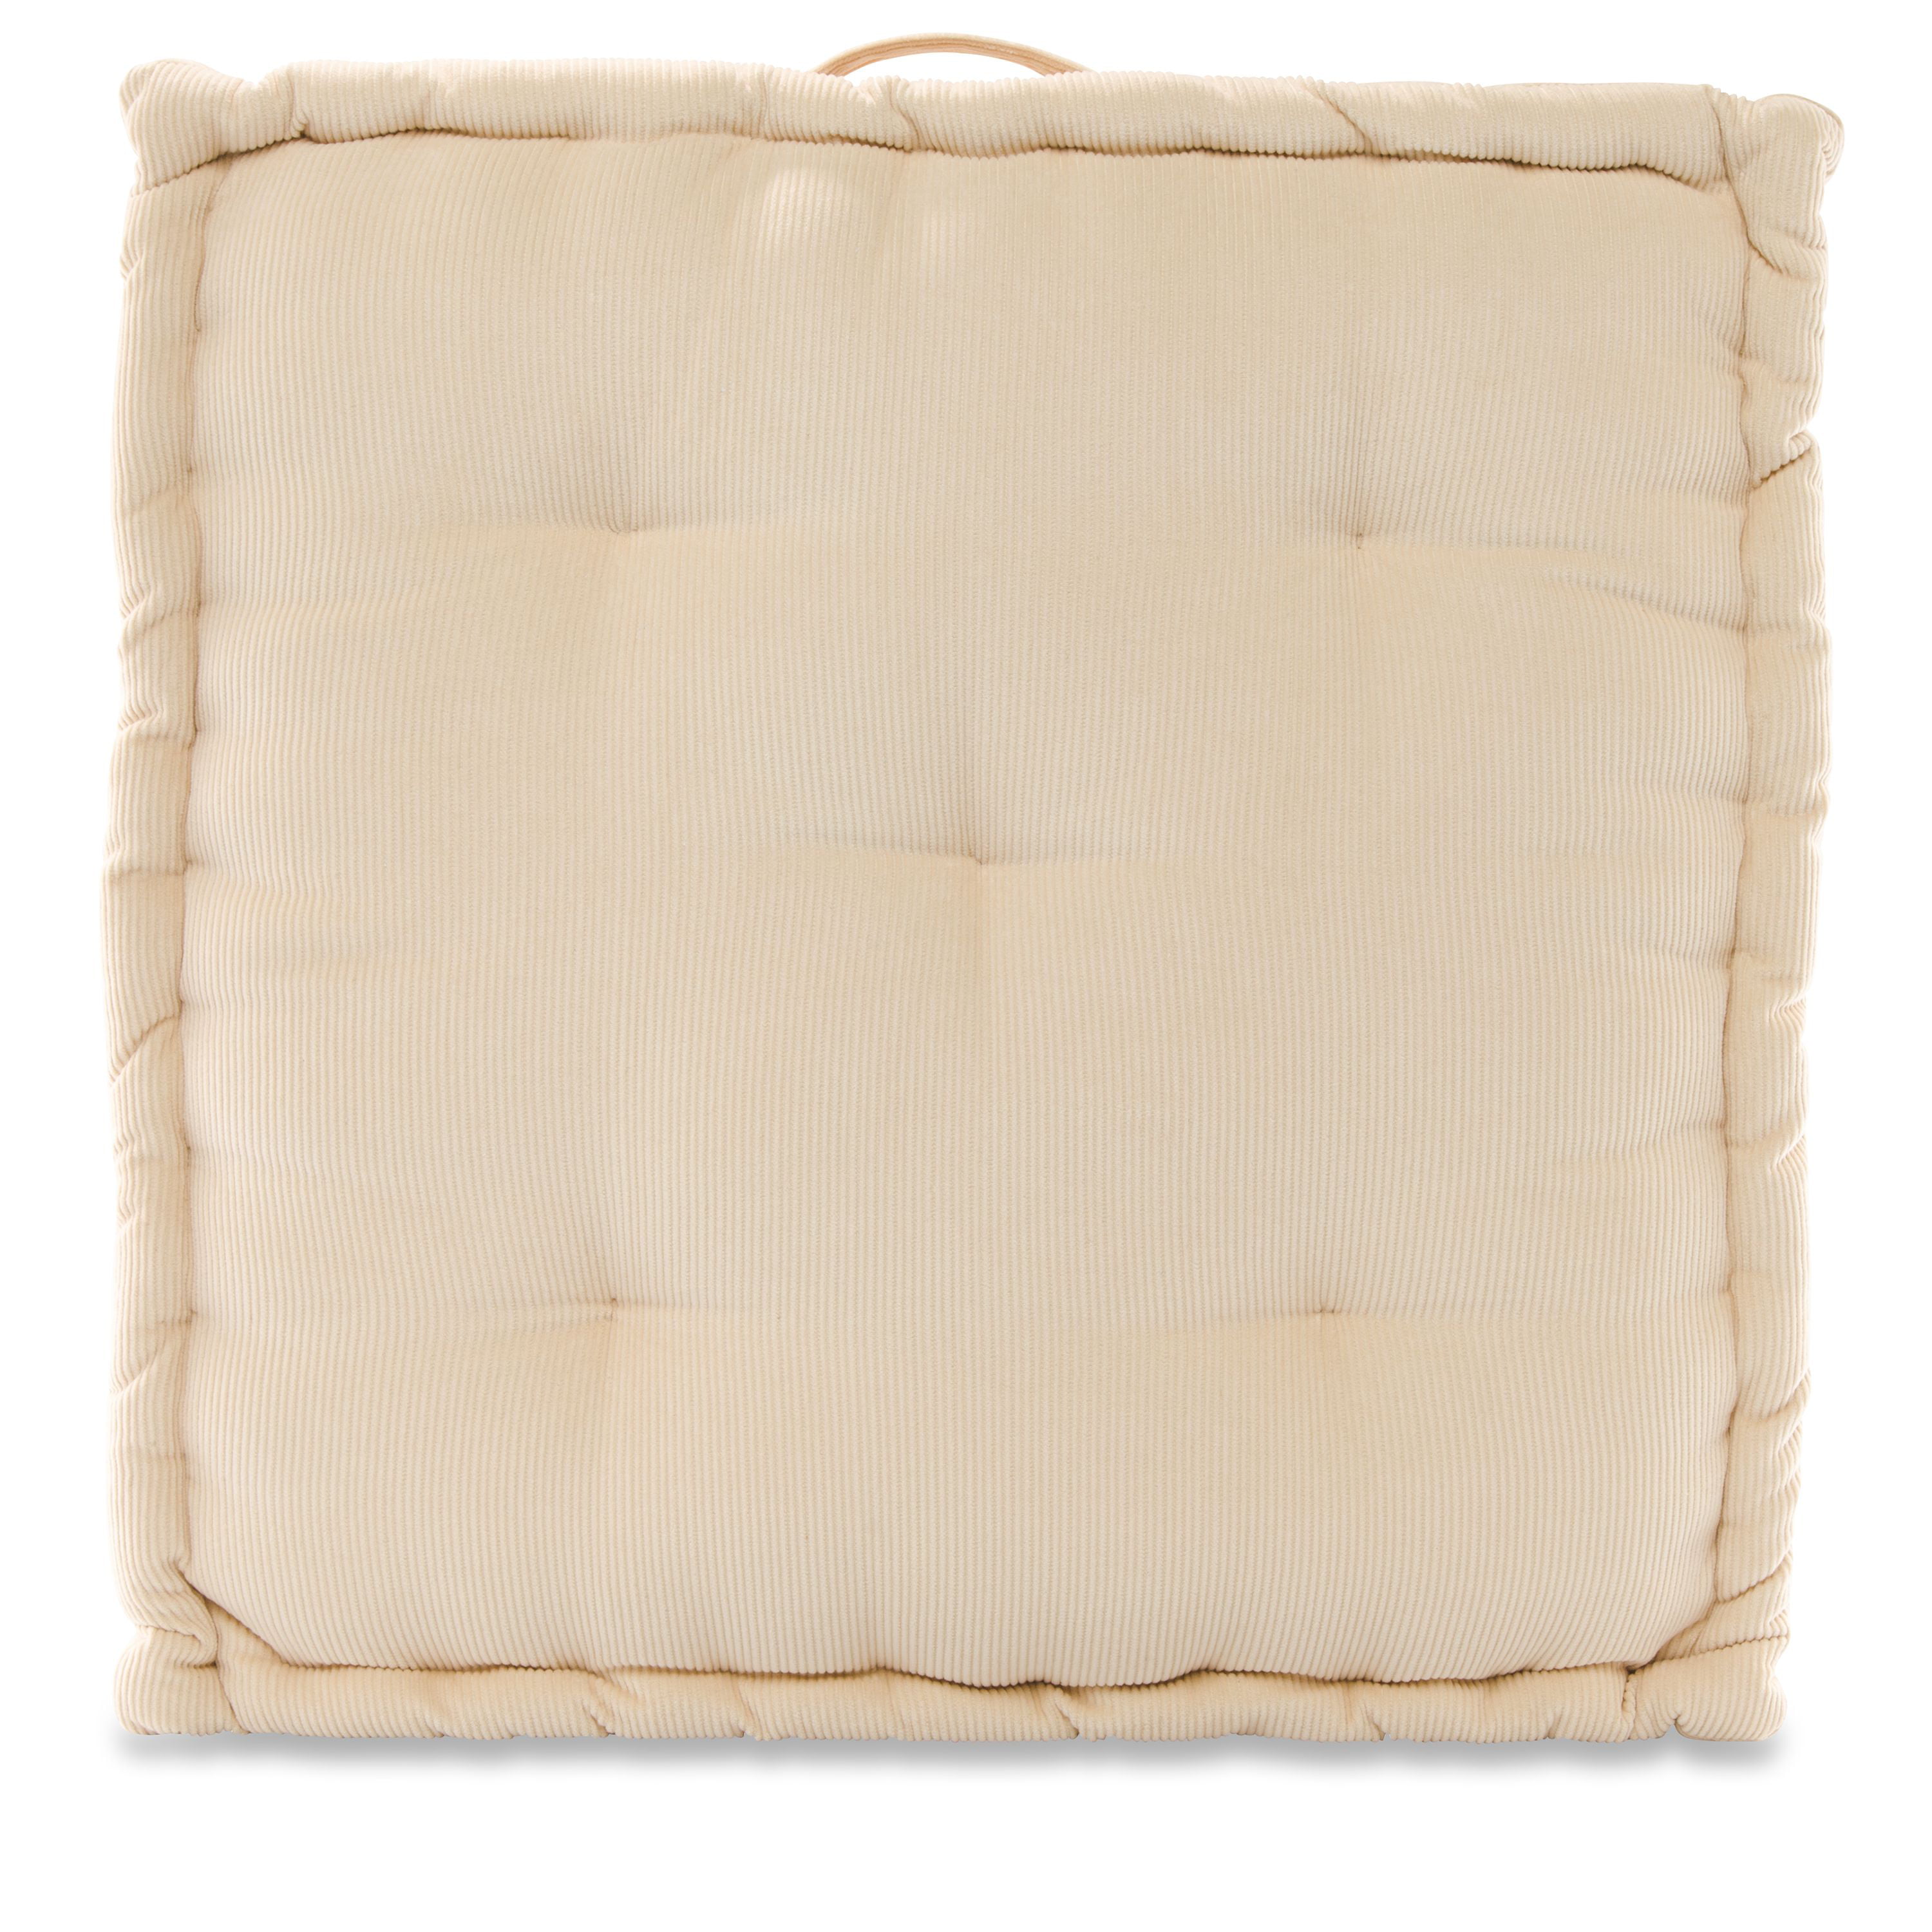 Sorra Home Ivory Square Floor Pillow with Handle 24 in x 24 in x 5 in